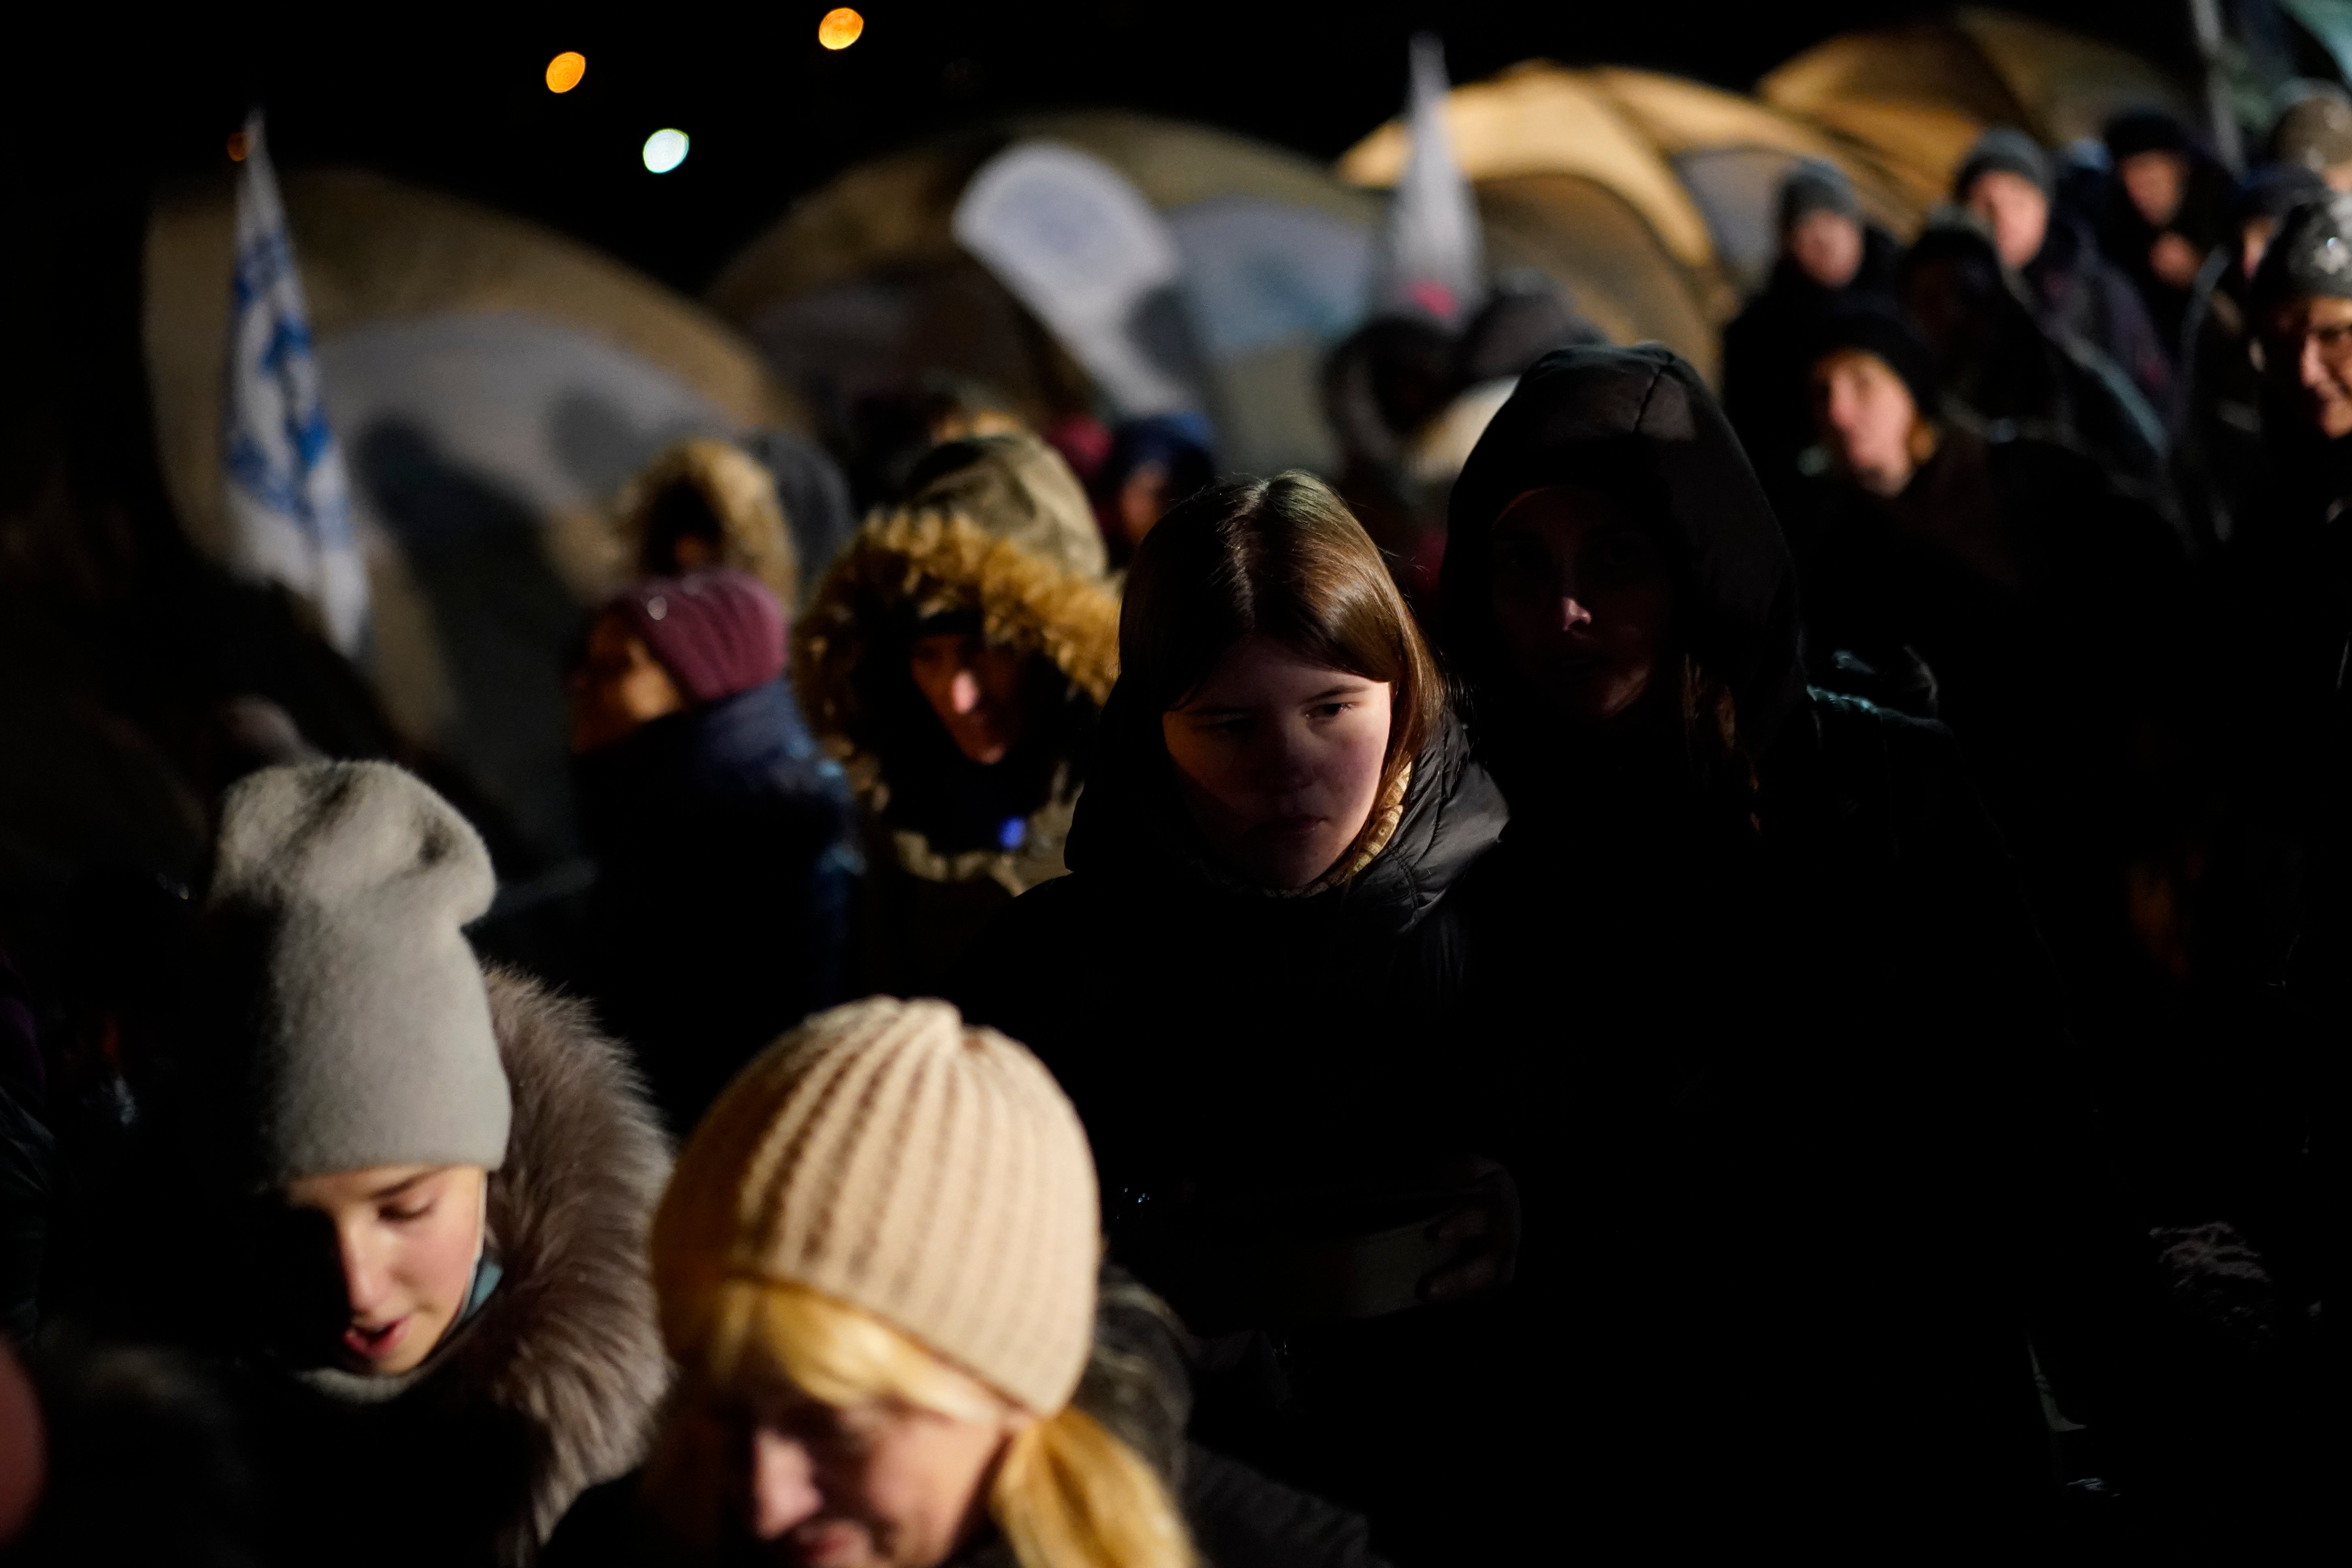 Refugees fleeing war in neighbouring Ukraine walk past tents after crossing to Medyka, Poland, Wednesday, March 9, 202